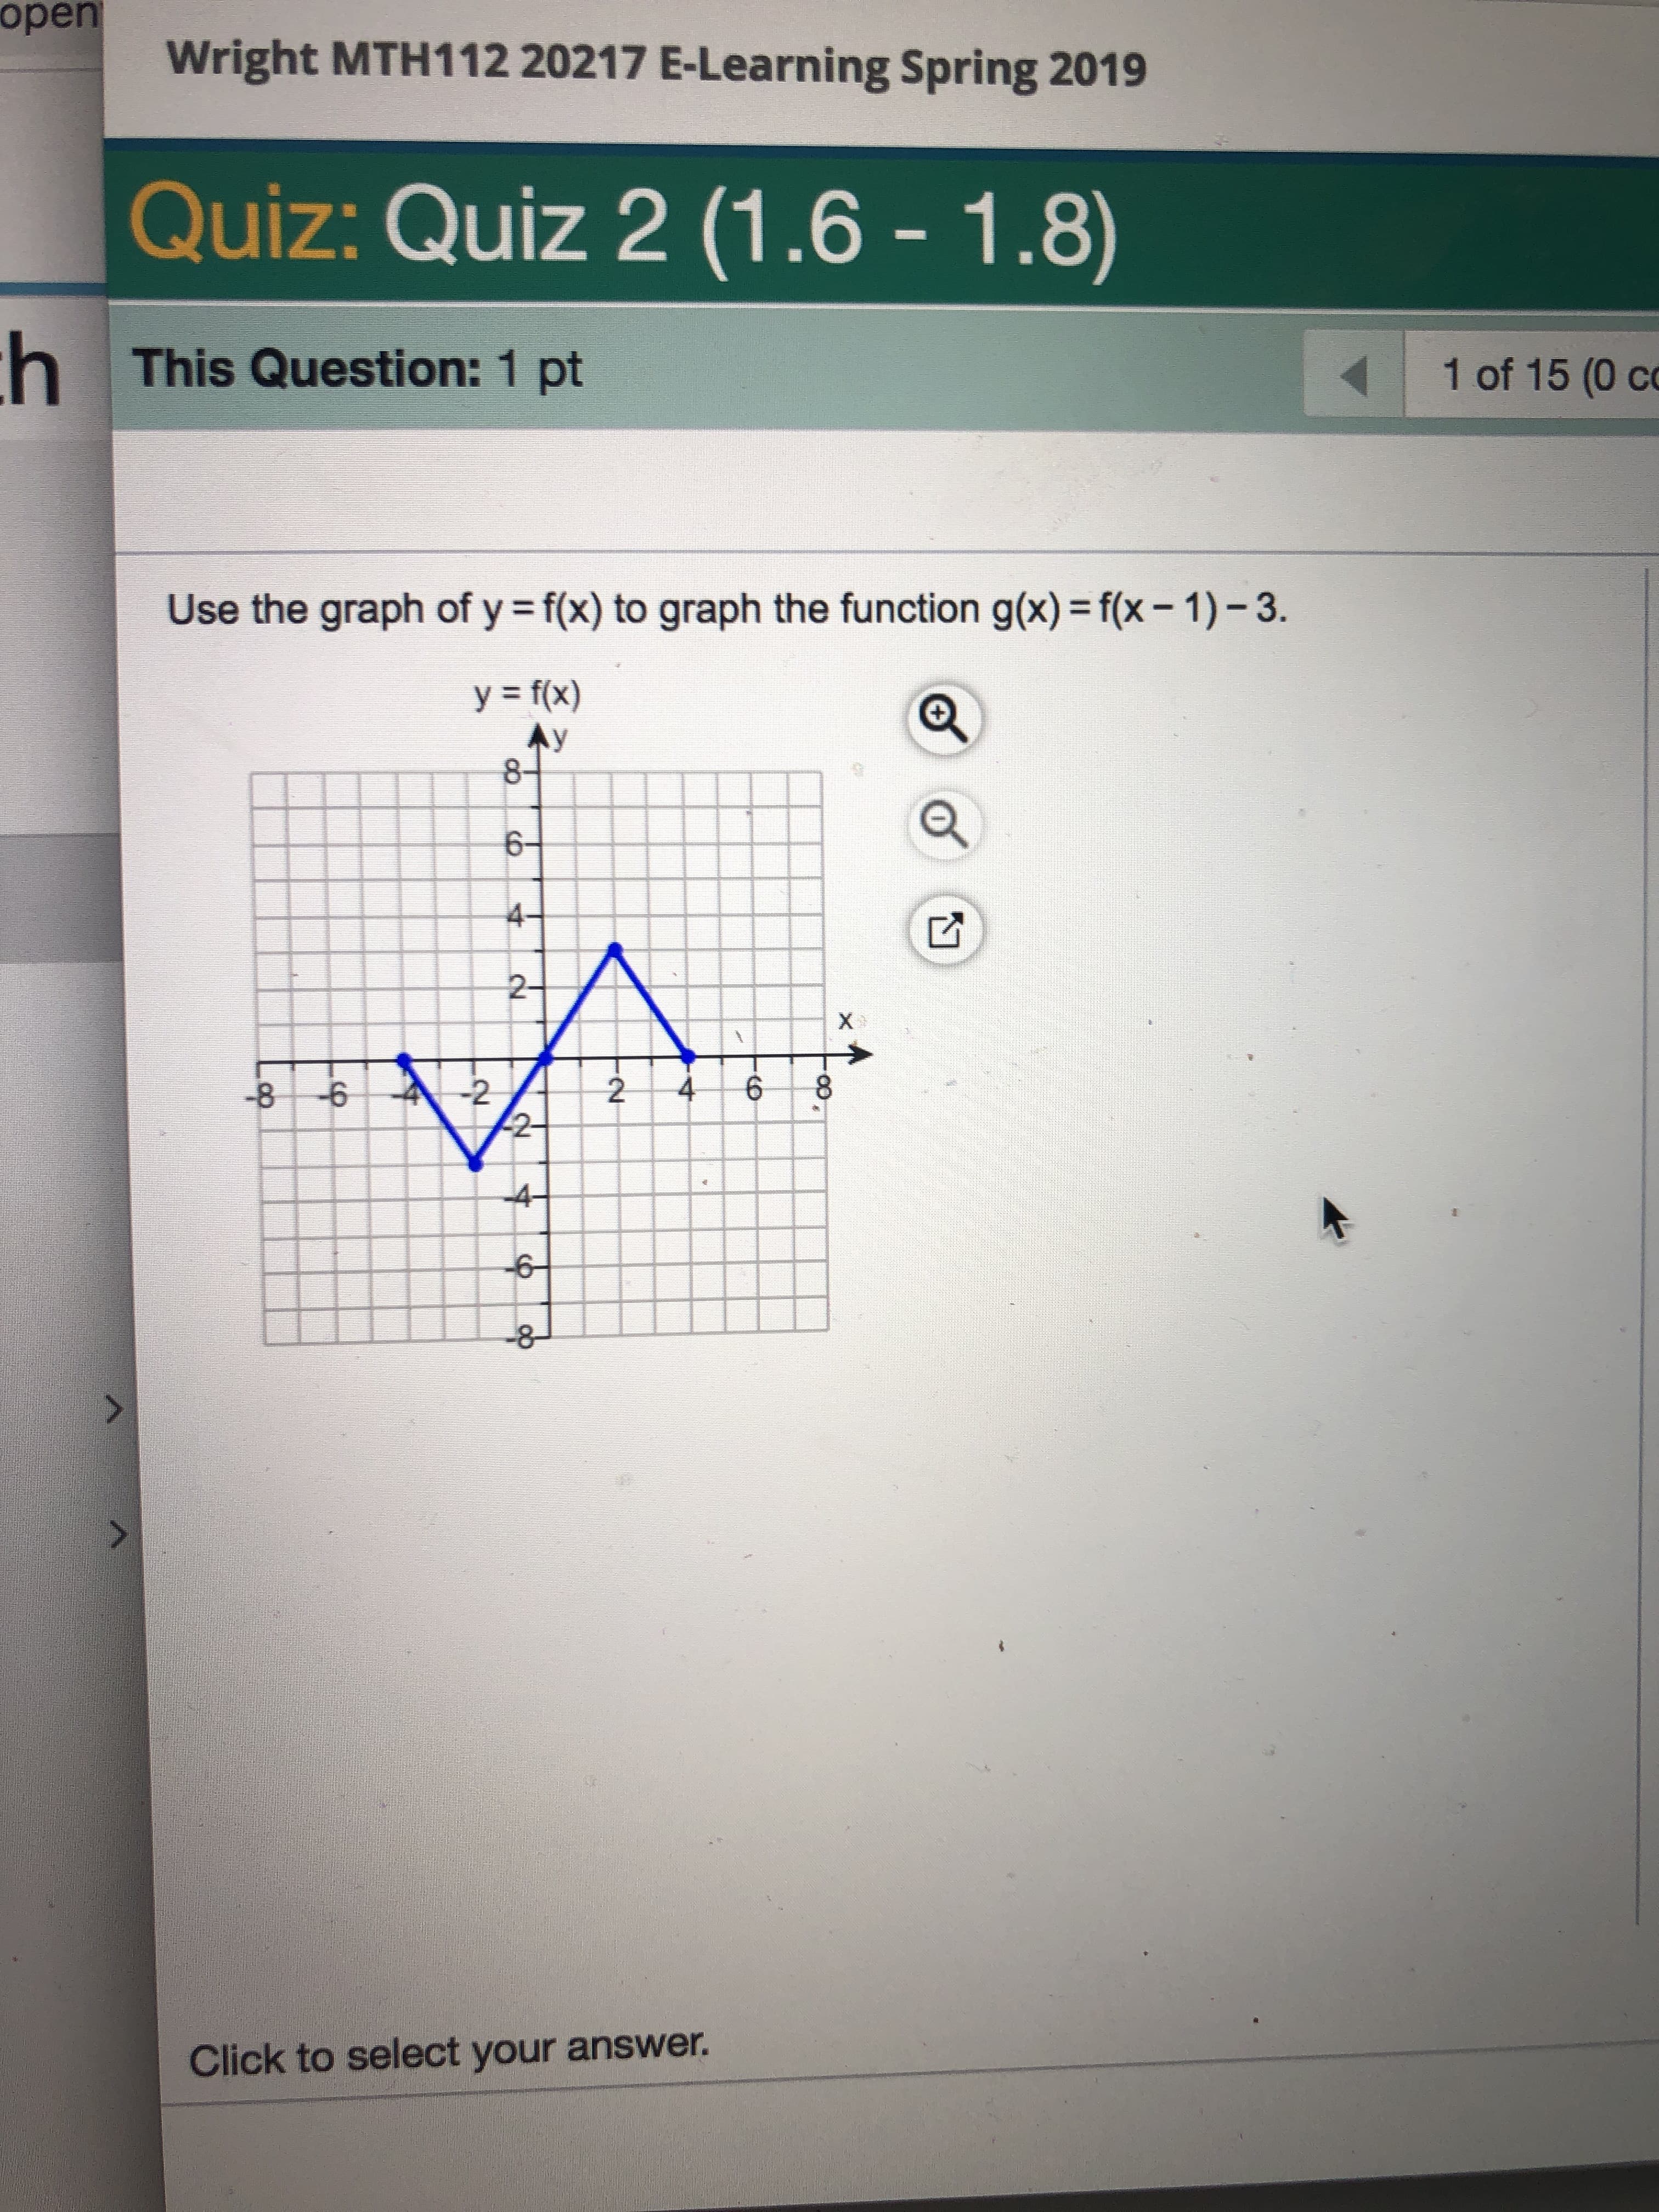 open
Wright MTH112 20217 E-Learning Spring 2019
Quiz: Quiz 2 (1.6 -1.8)
This Question: 1 pt
1 of 15 (0 co
Use the graph of y f(x) to graph the function g(x) f(x- 1)-3.
y=f(x)
6-
2-
-8
2
2
Click to select your answer
